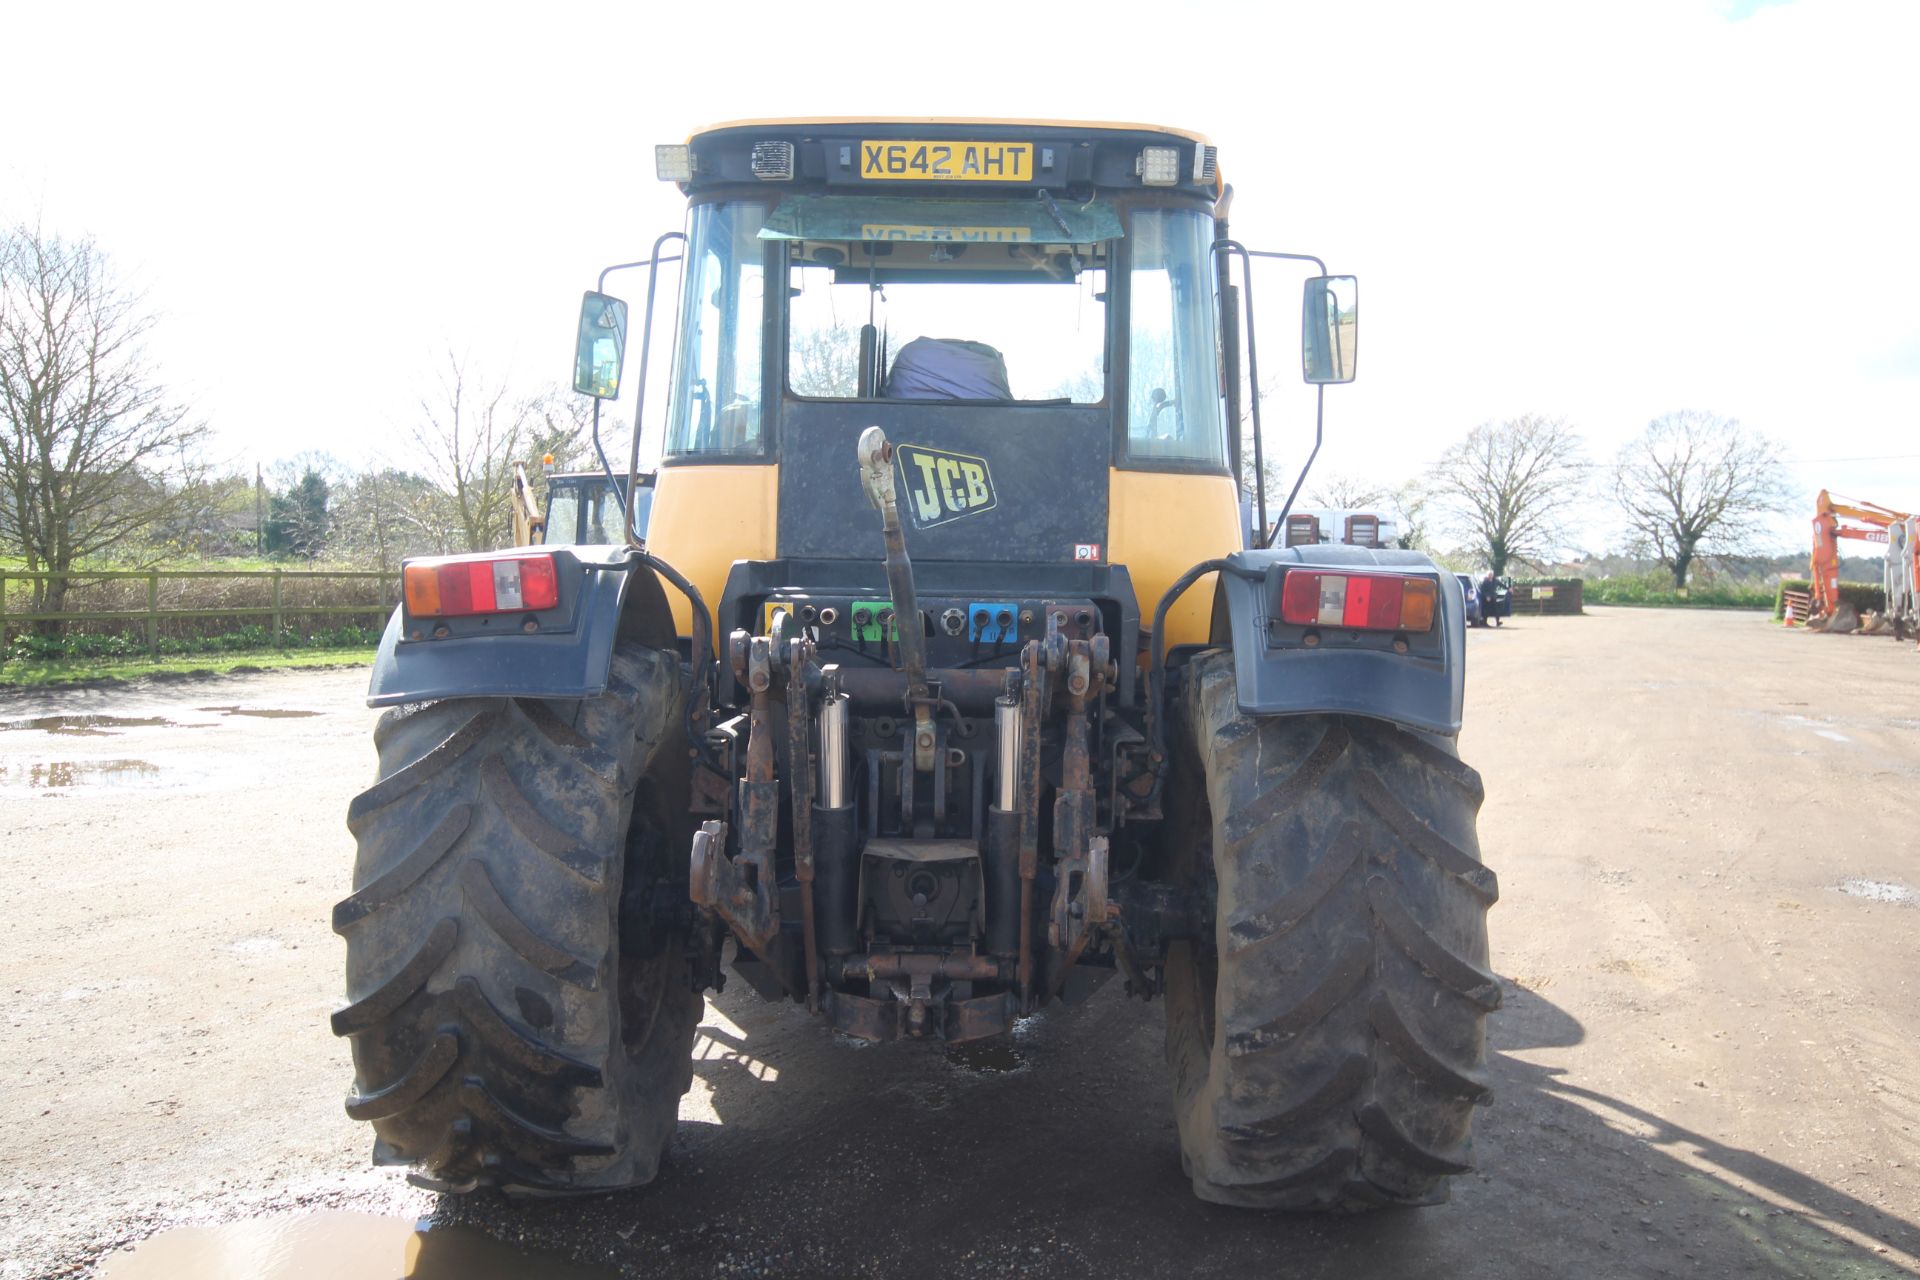 JCB Fastrac 3185 Autoshift 4WD tractor. Registration X642 AHT. Date of first registration 04/09/ - Image 4 of 71